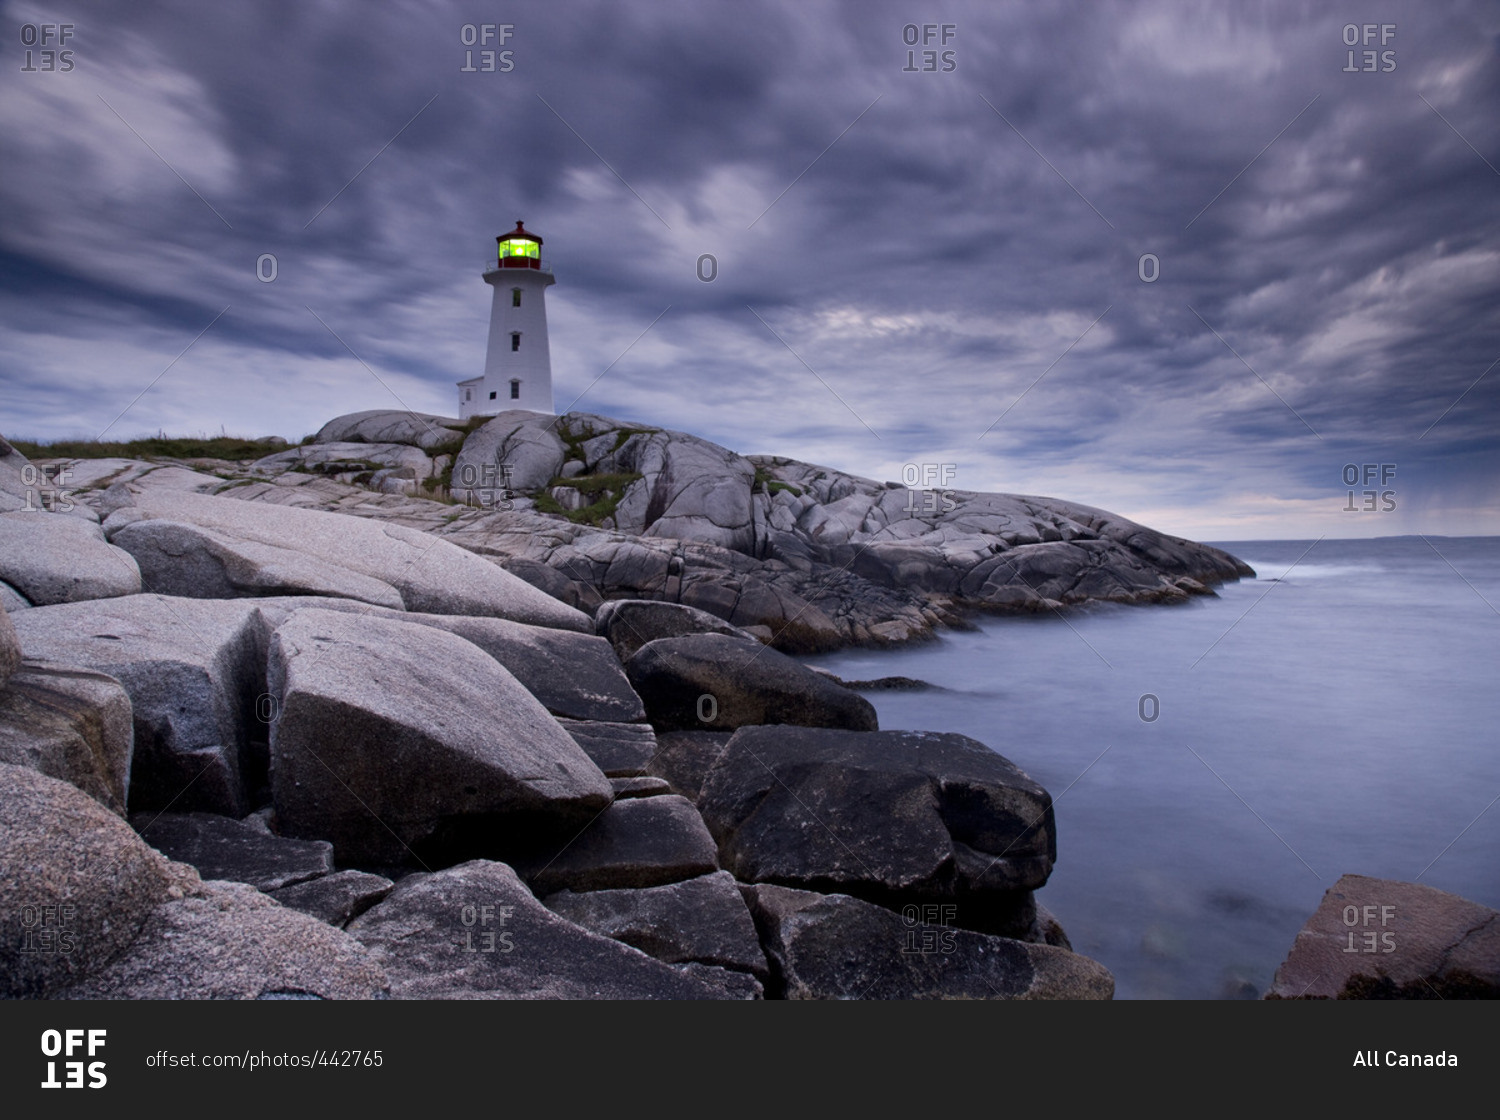 Lighthouse at Peggy's Cove during approaching storm, Nova Scotia, Canada.